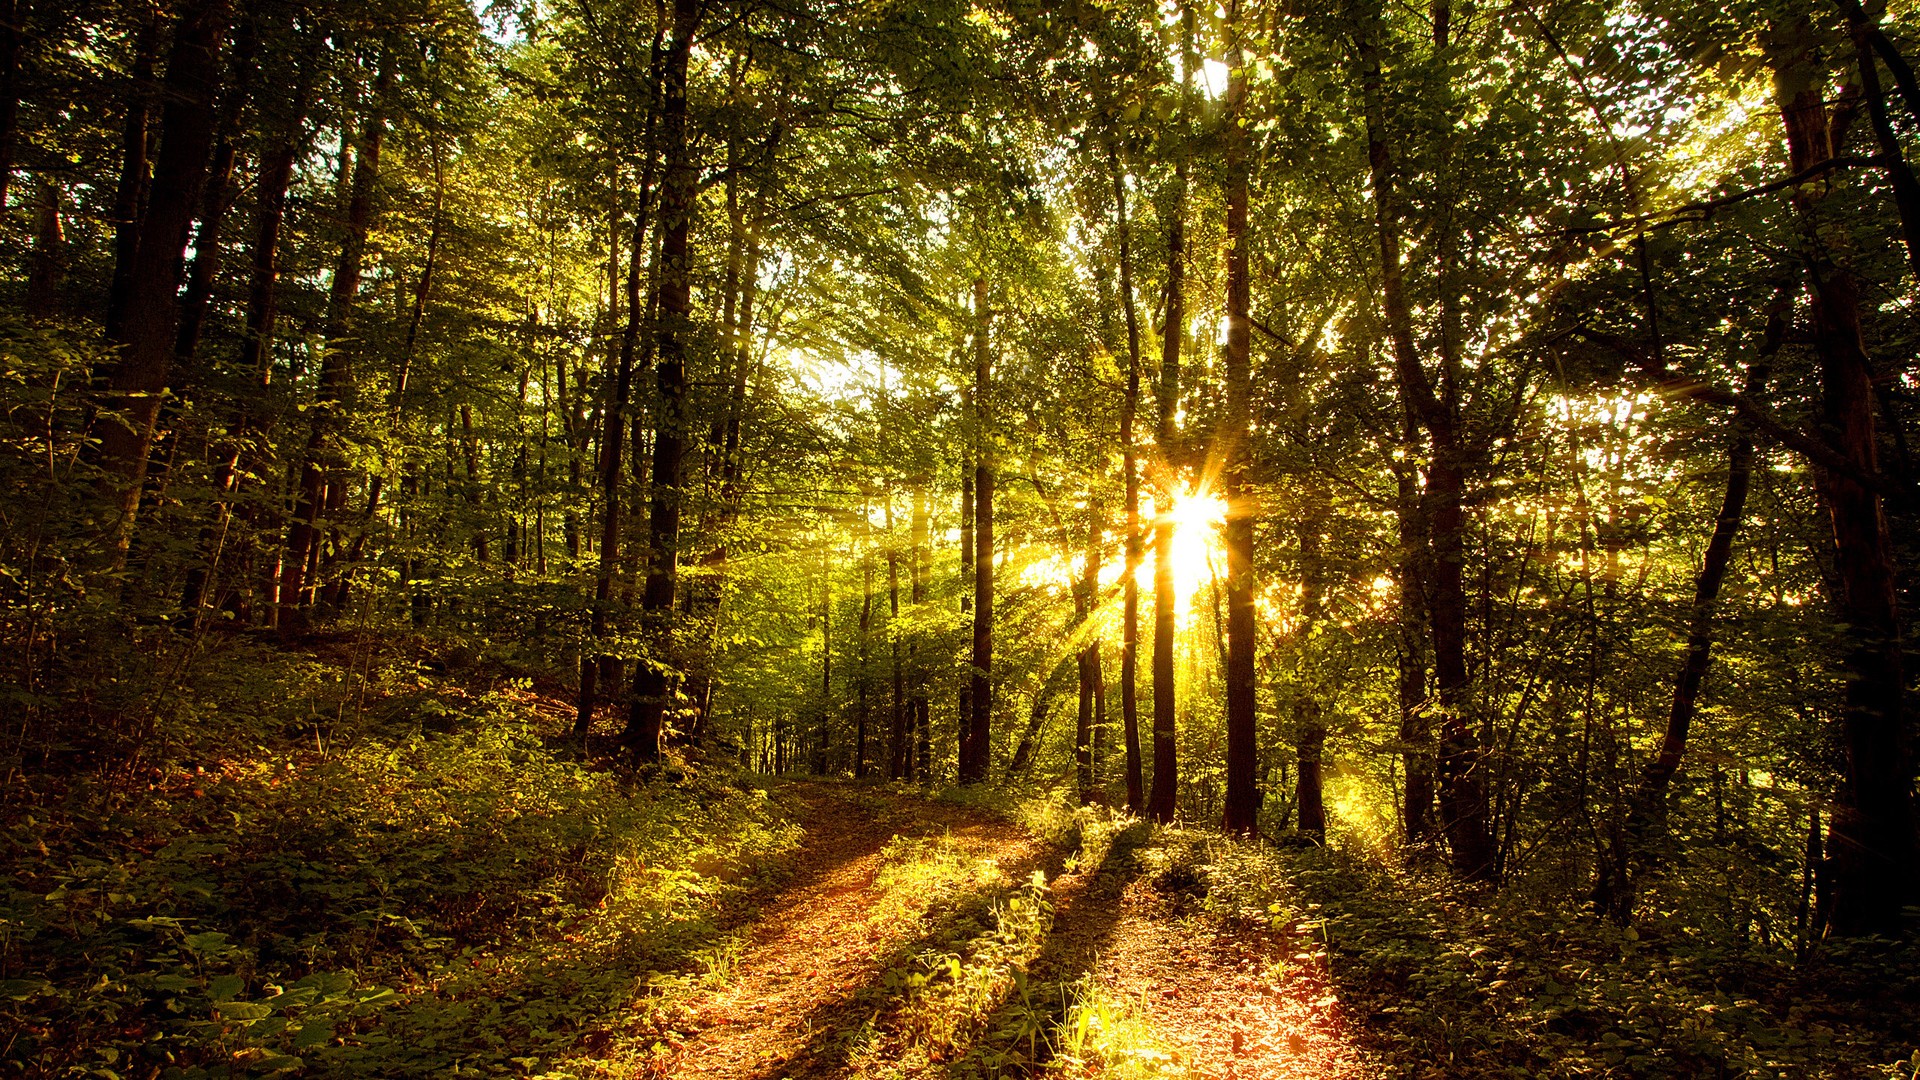 General 1920x1080 nature trees forest grass sun rays leaves path sunlight plants